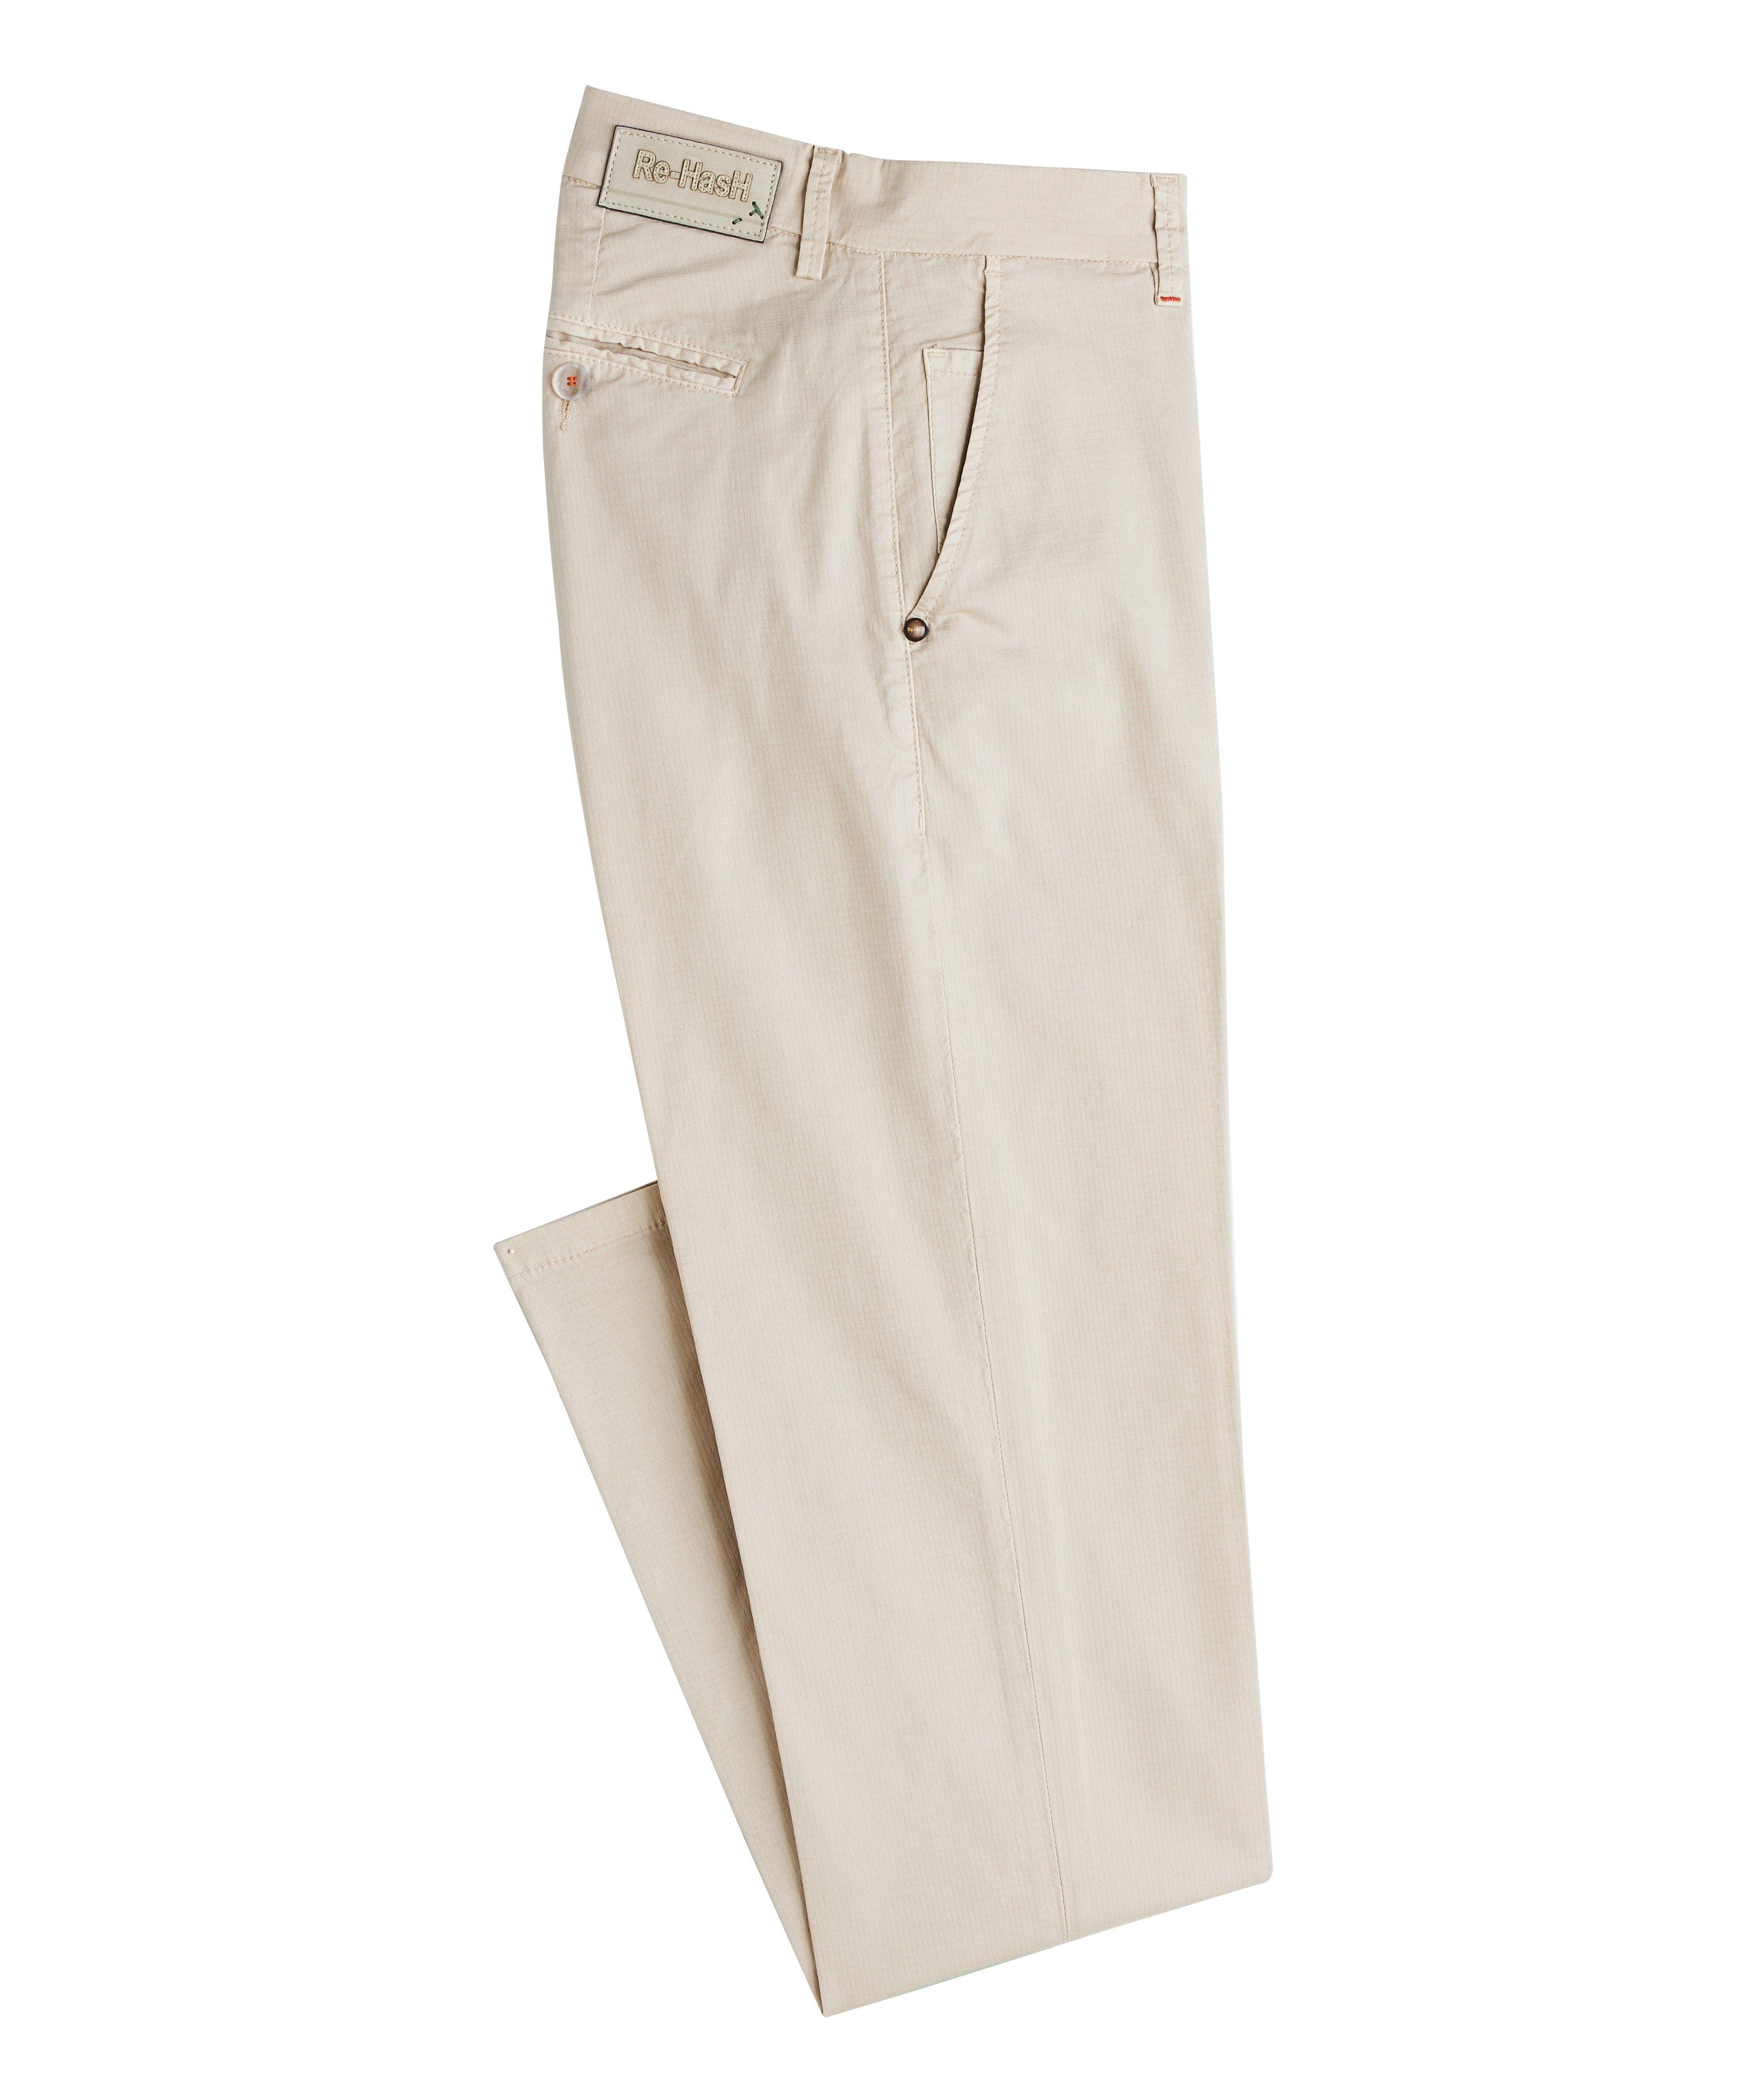 Harry Rosen Canaletto Stretch Chinos - 20084226061